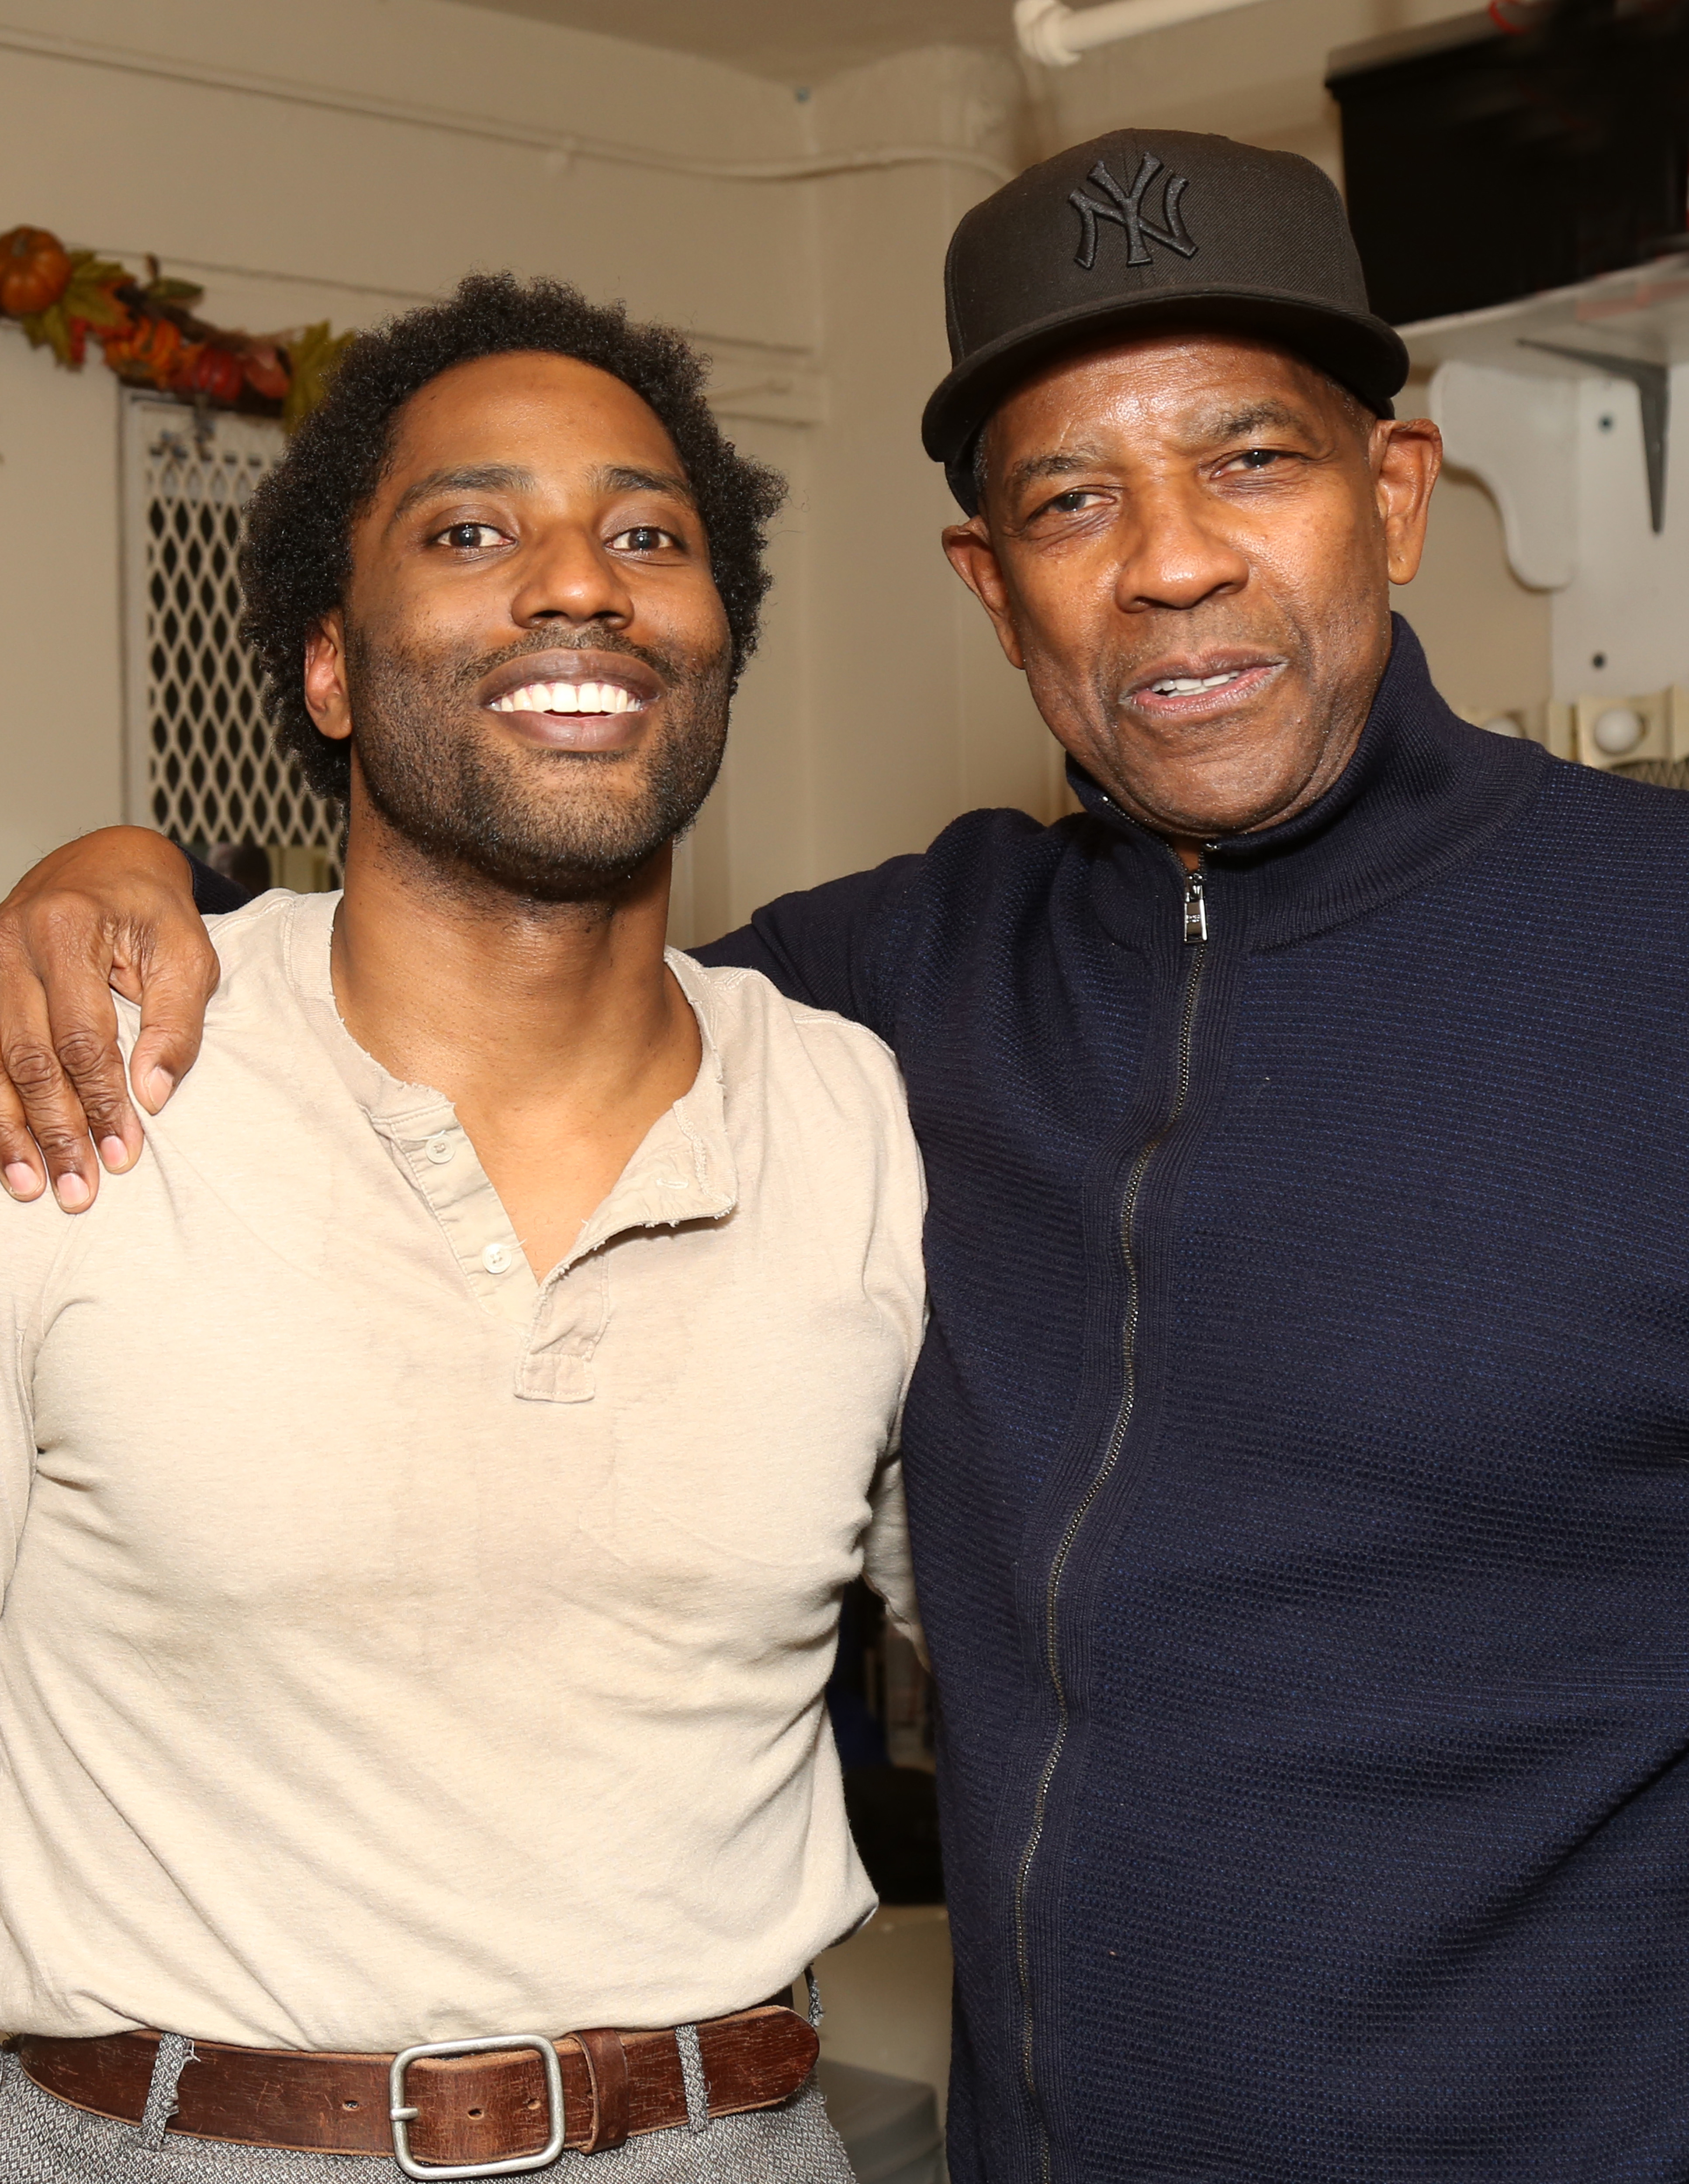 Two men smiling and embracing, one in a beige shirt, the other in a dark sweater and cap